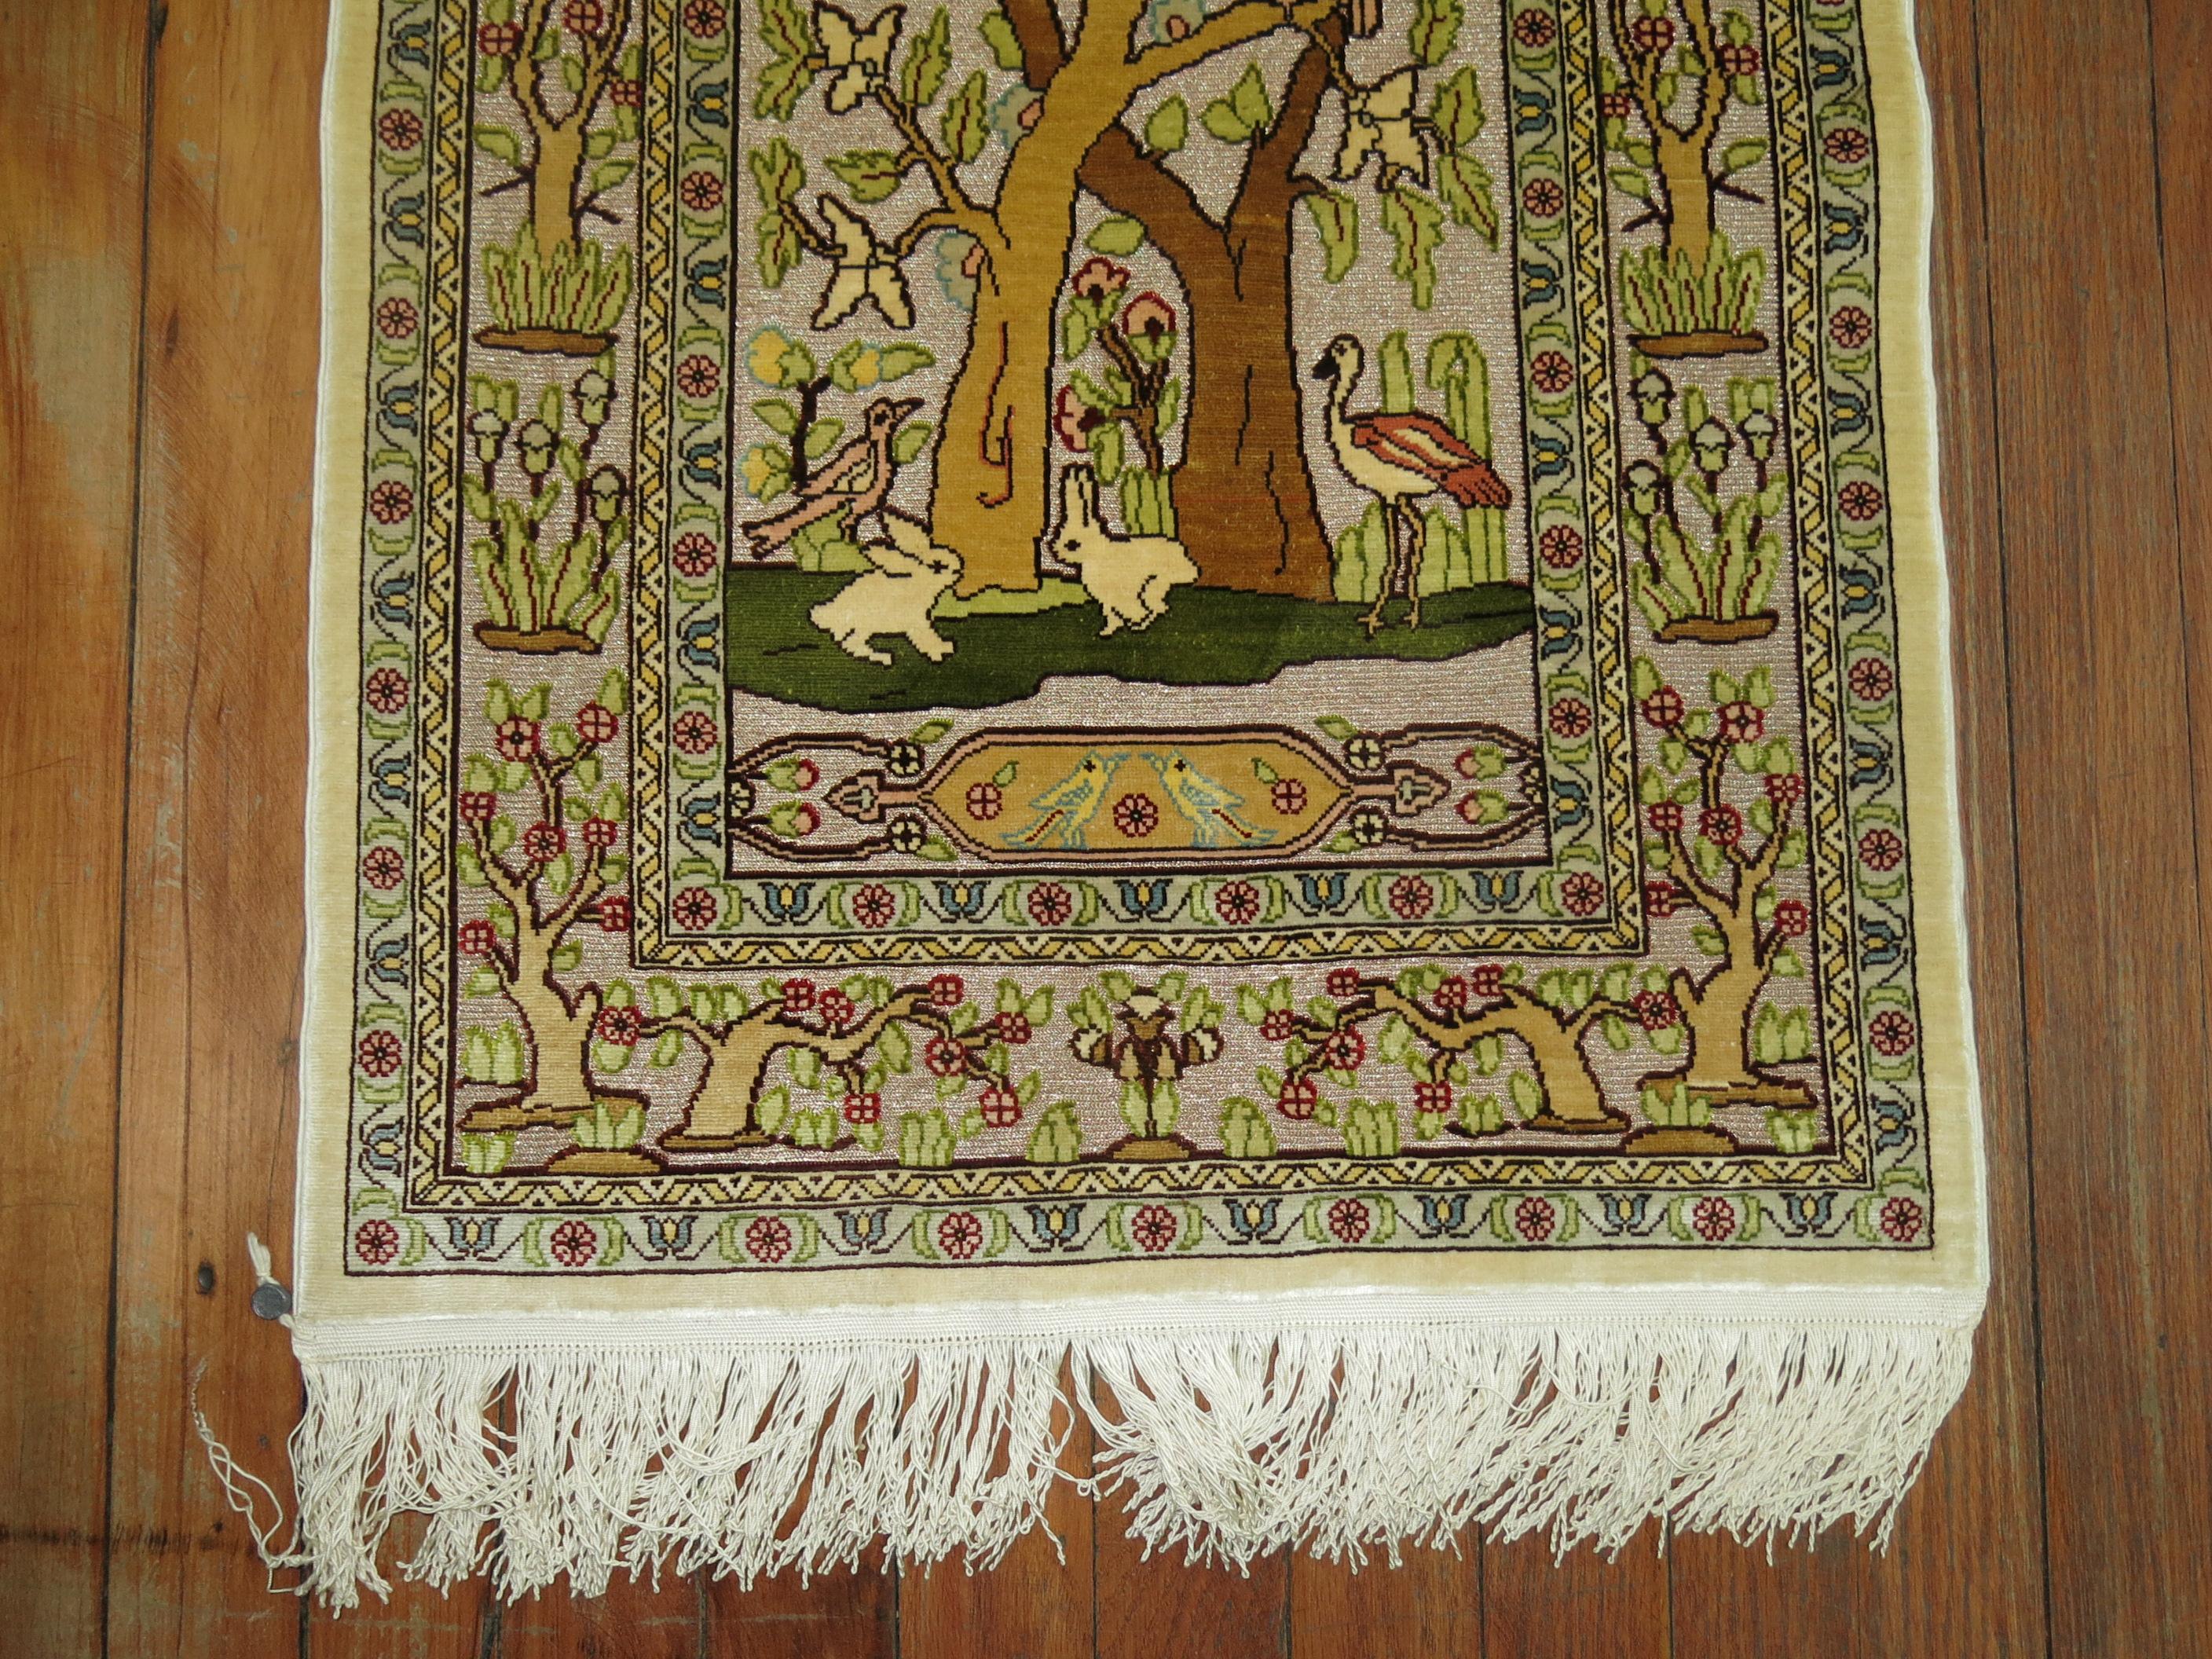 A late 20th century Turkish Herekeh silk and metallic pictorial Rug
In the mid-19th century, Sultan Abdul Majid proclaimed Hereke to be the royal weaving village. The small rugs were woven there were considered the finest in the world. All examples